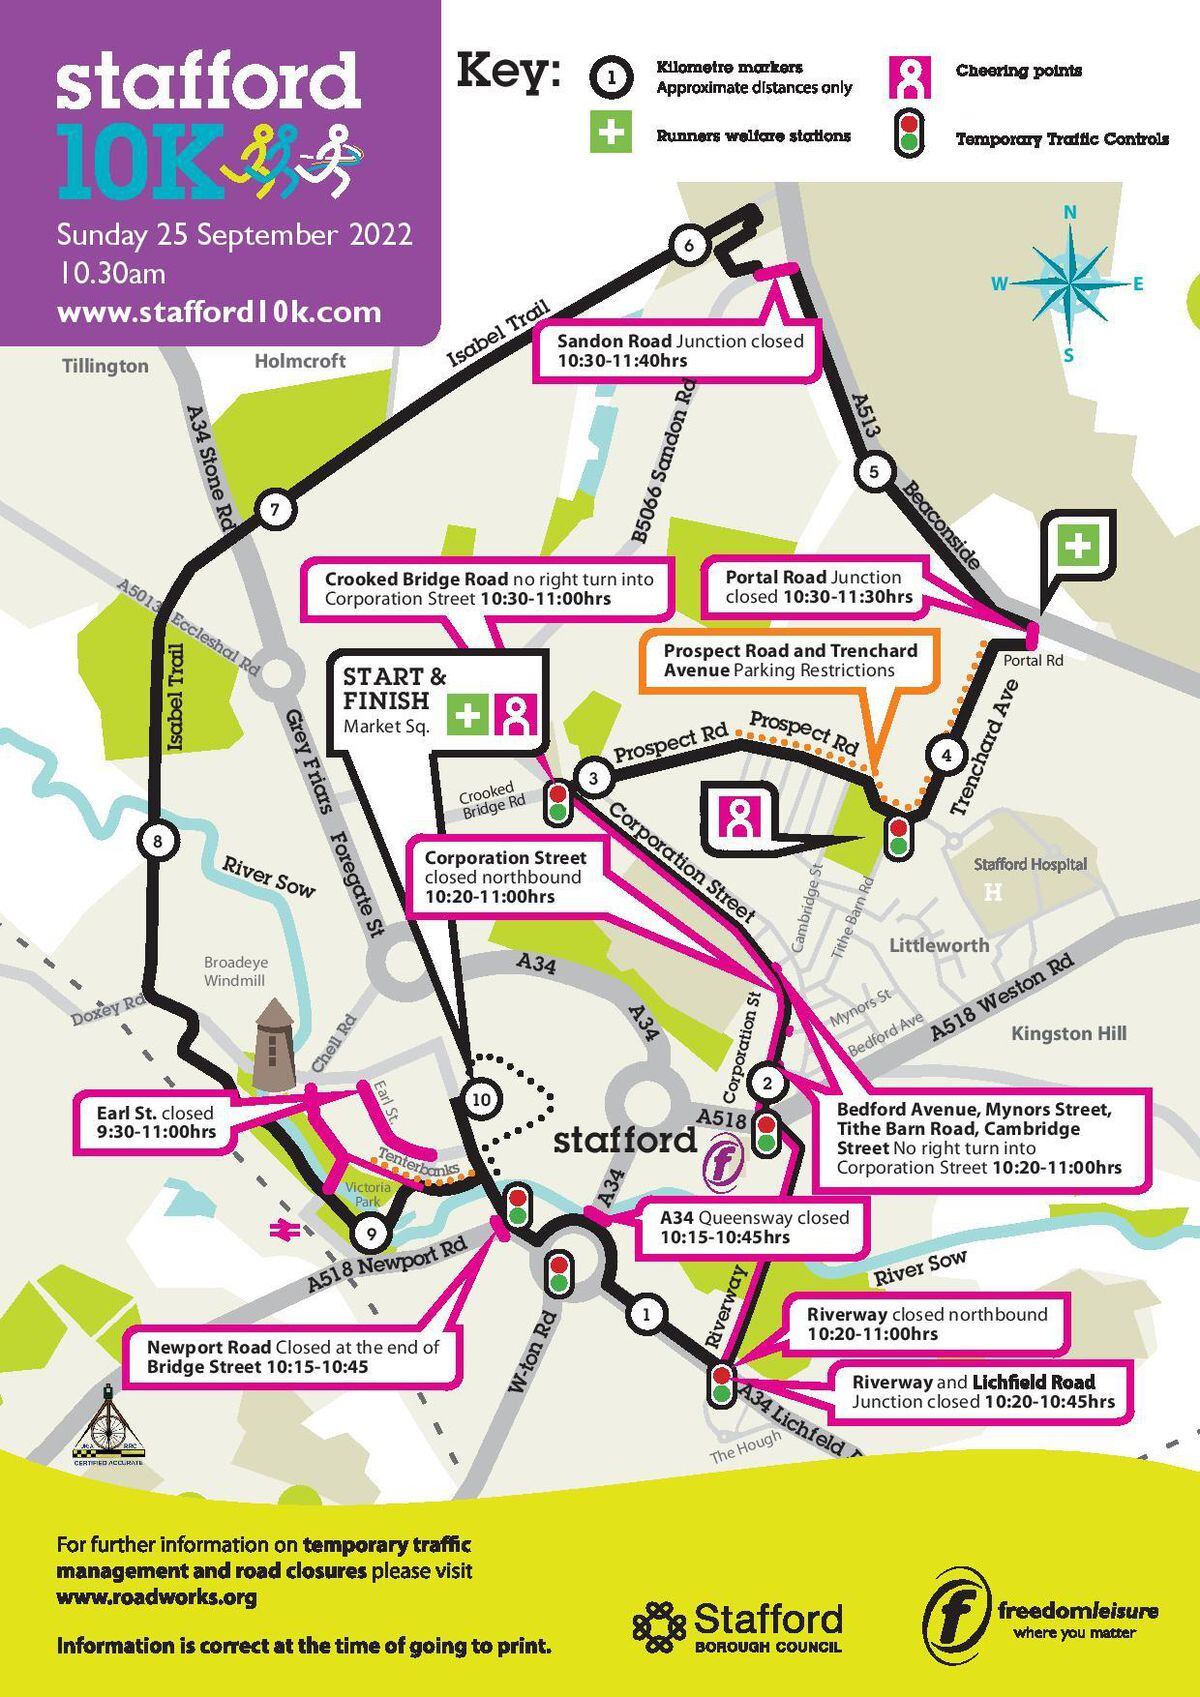 Stafford 10k road closures and route map. Image: Feedom Leisure